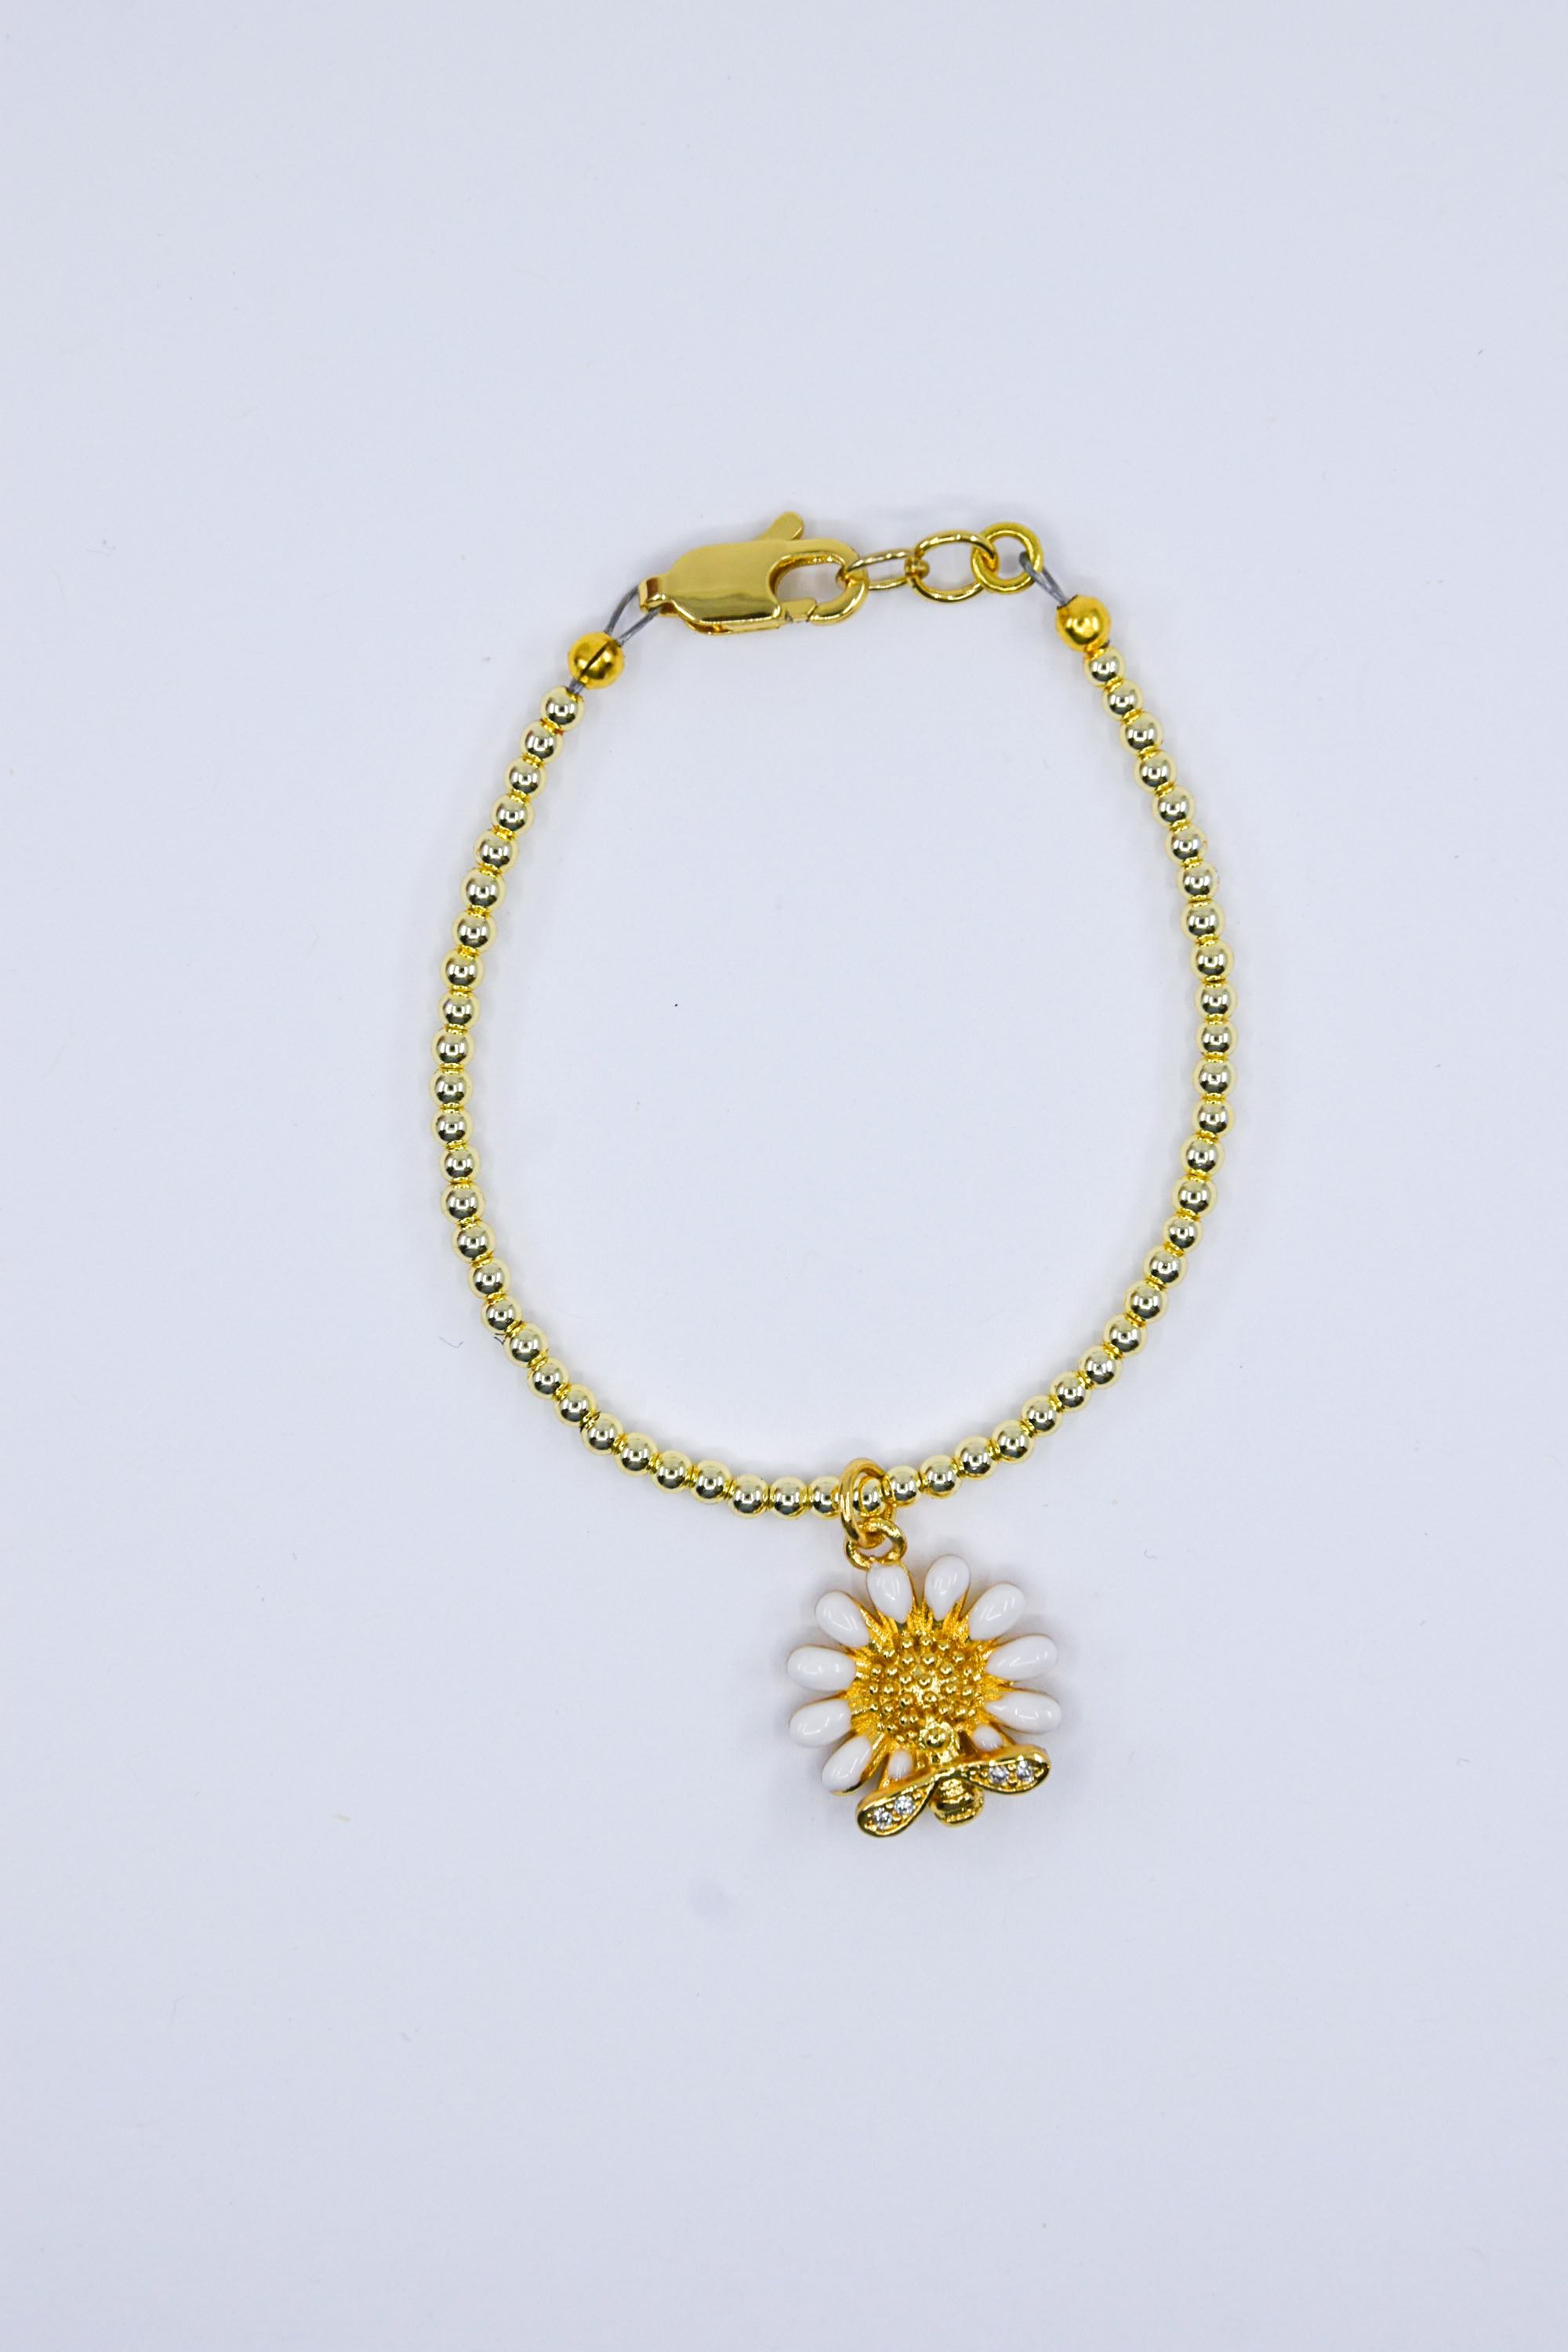 Gold and White Daisy with Bee Charm Bracelet